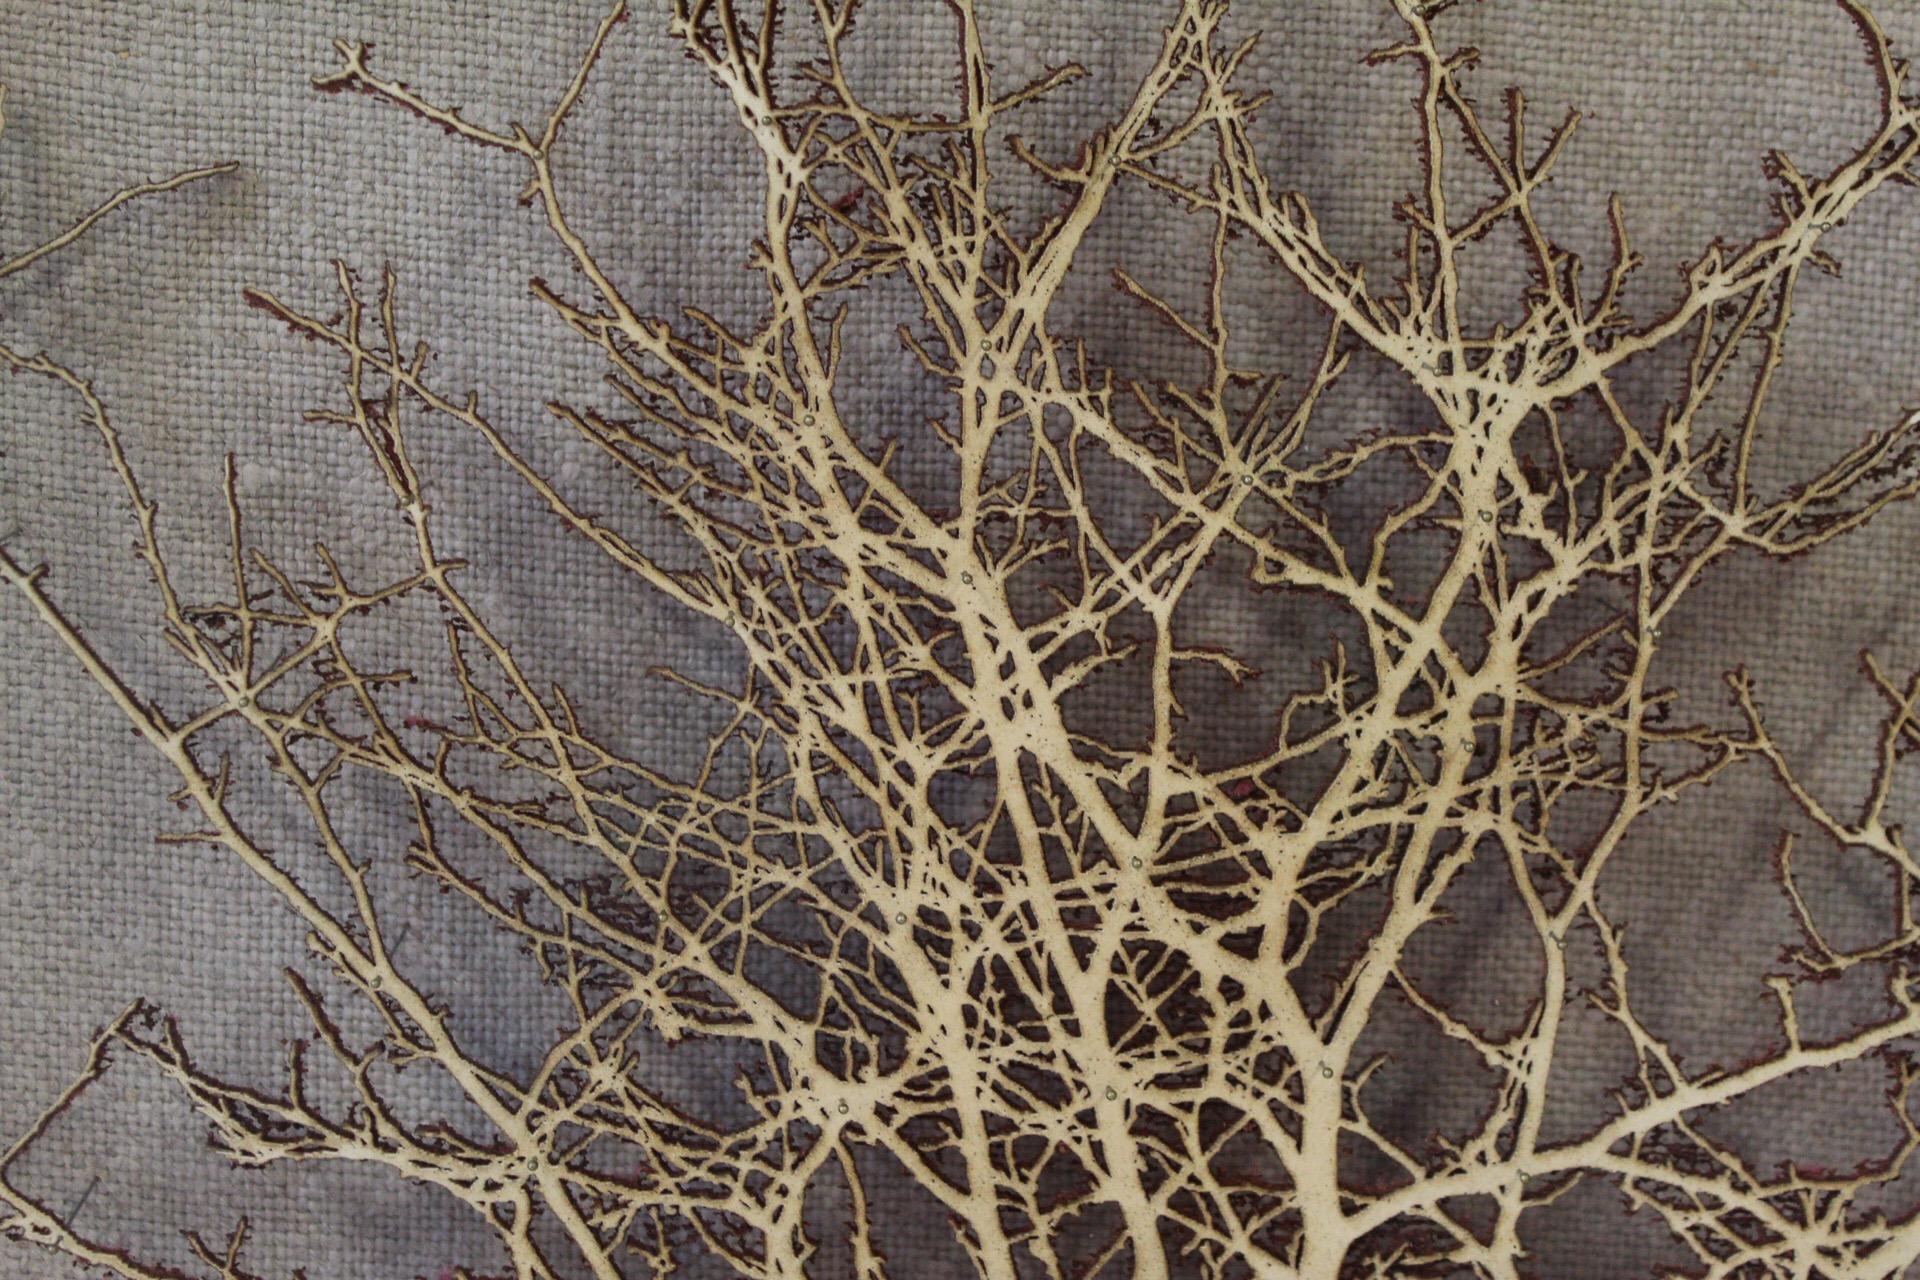 Emma Levine
Fawn Hawthorn
Laser Cut Paper Hawthorn Tree Attached with Pins
Etymology Pins and Paper
Sheet Size: H 44cm x W 44cm x D 0.5cm
Framed Size: H 48.5cm x W 48.5cm x D 7cm
Framed in a Dark Grey Wood Effect Box Frame

Fawn Hawthorne is an